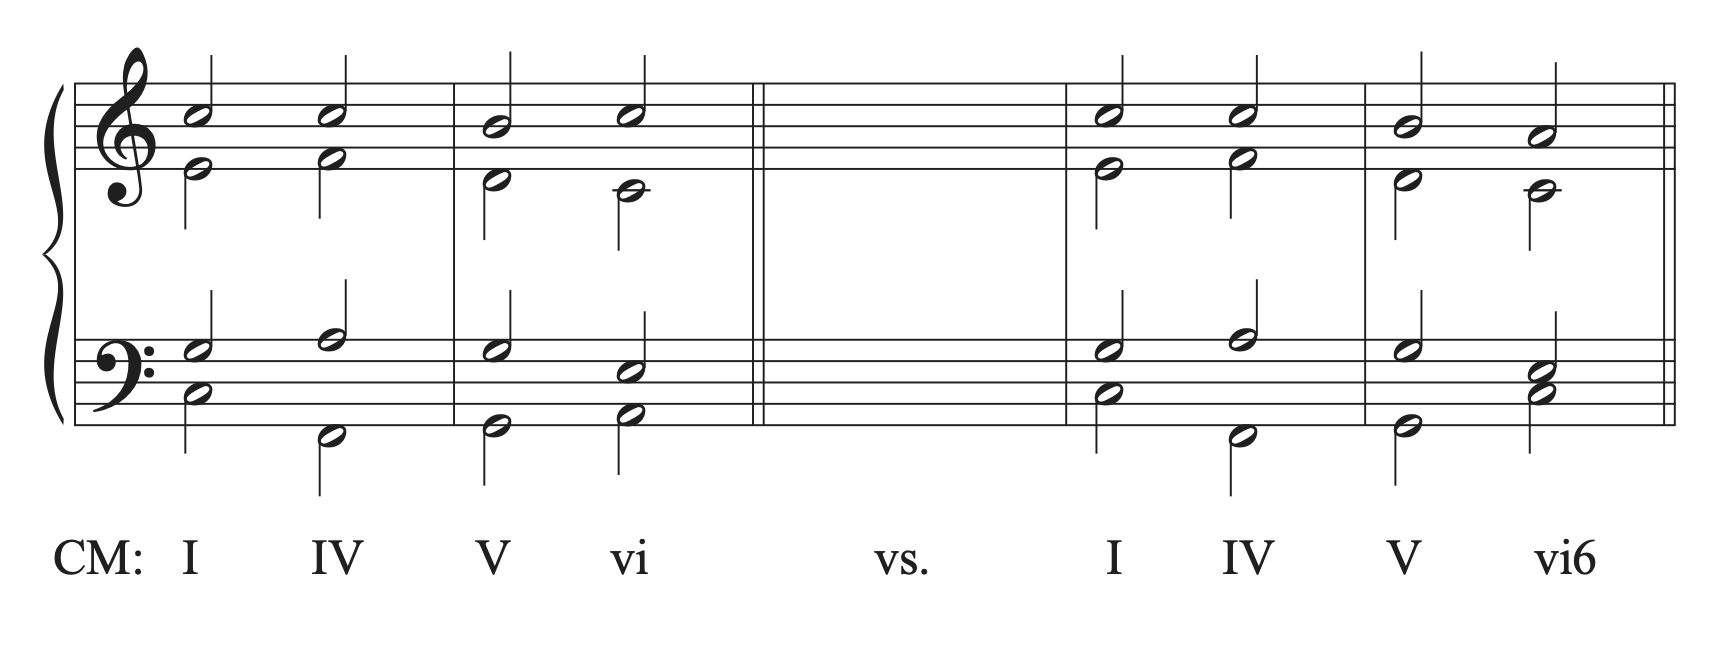 A musical example showing the difference between moving from V to vi and moving from V to vi6.